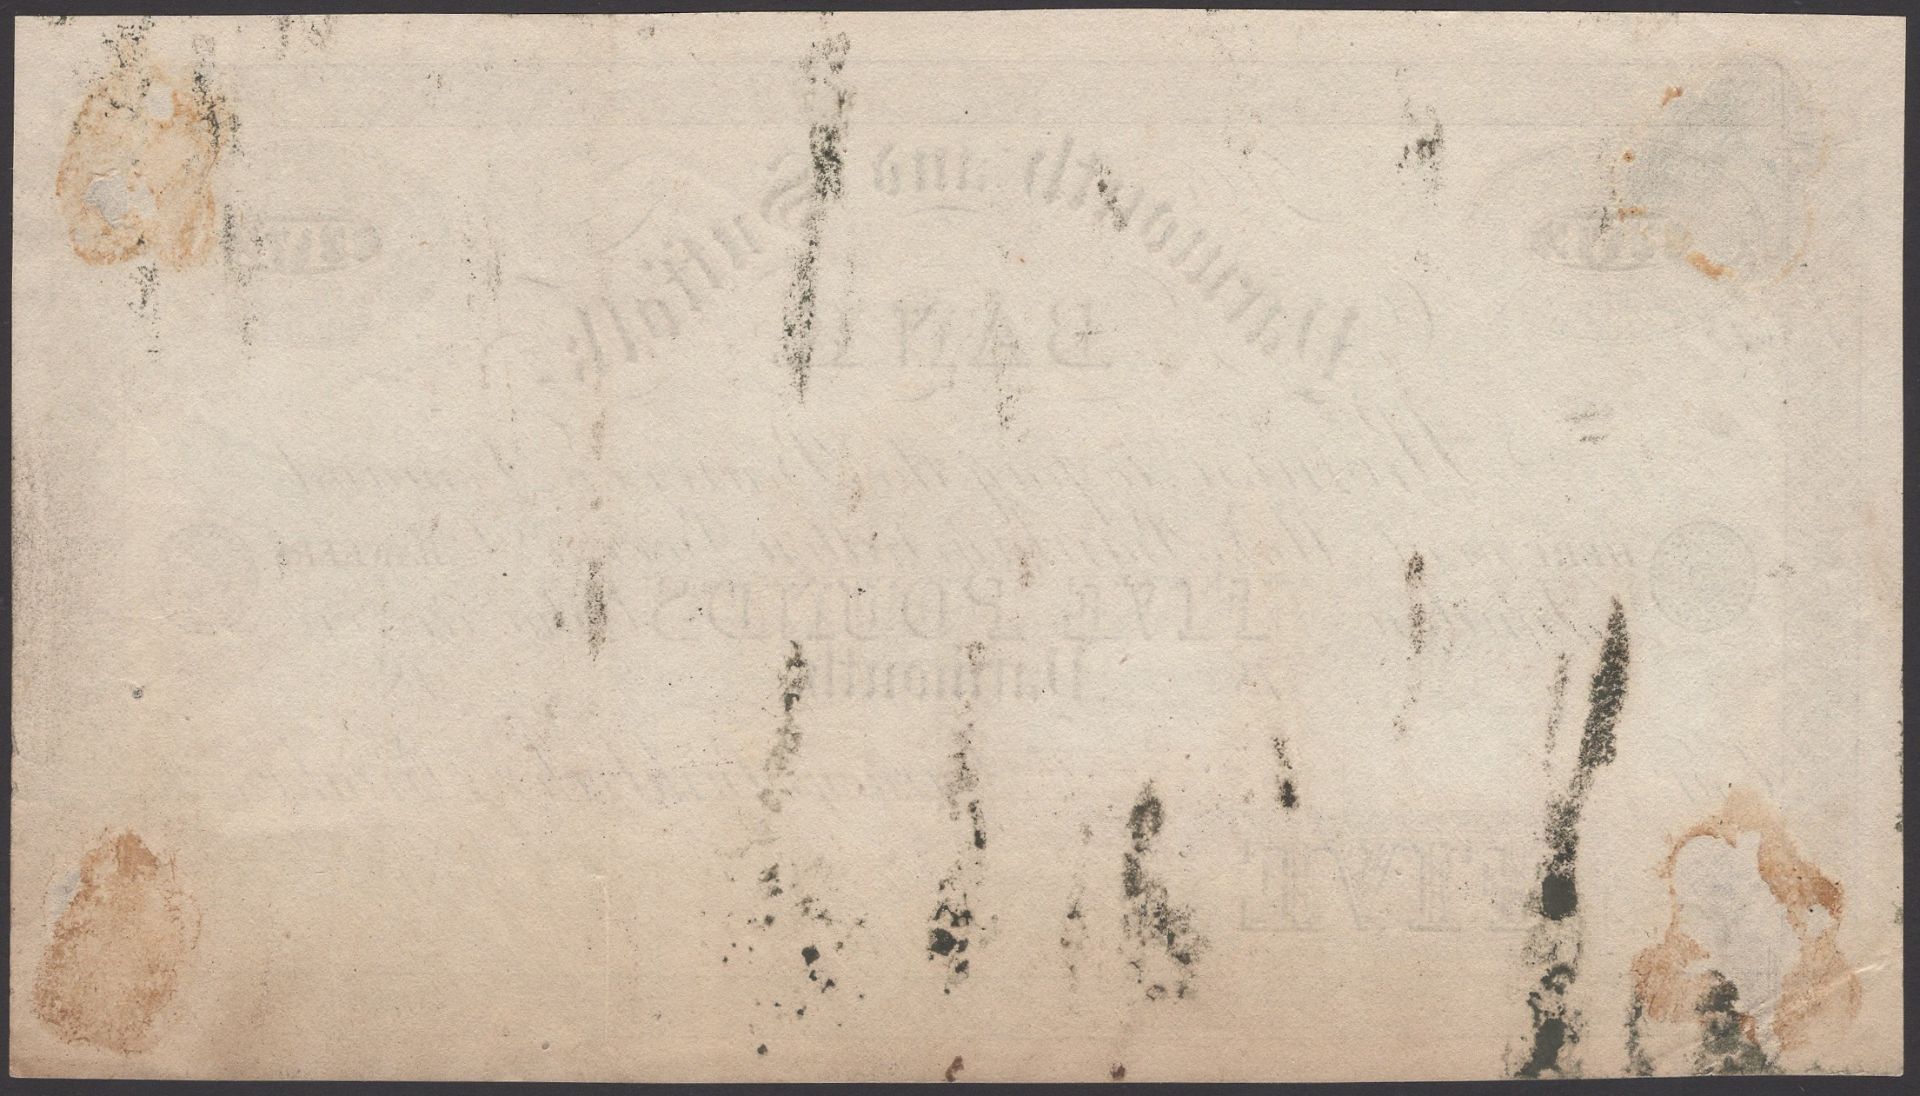 Yarmouth & Suffolk Bank, for Gurneys, Birkbeck & Brightwens, proof on paper for Â£5, 18-, no... - Image 2 of 2